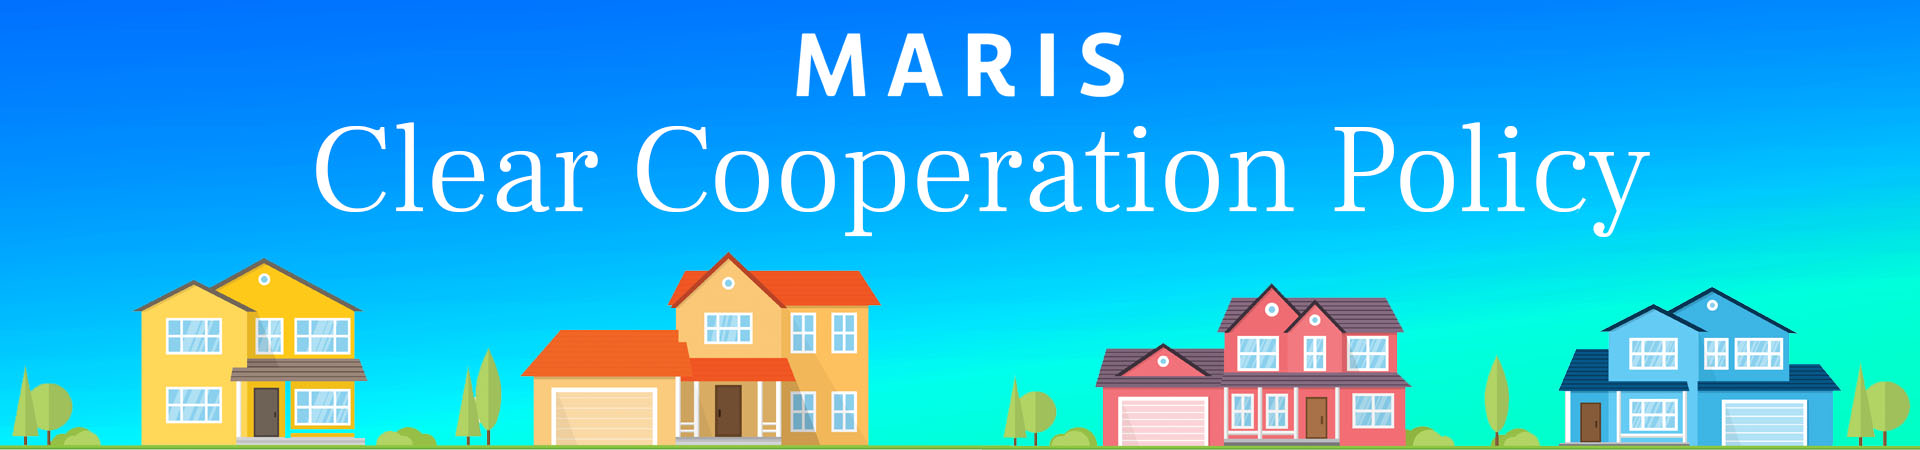 Maris Clear Cooperation Policy